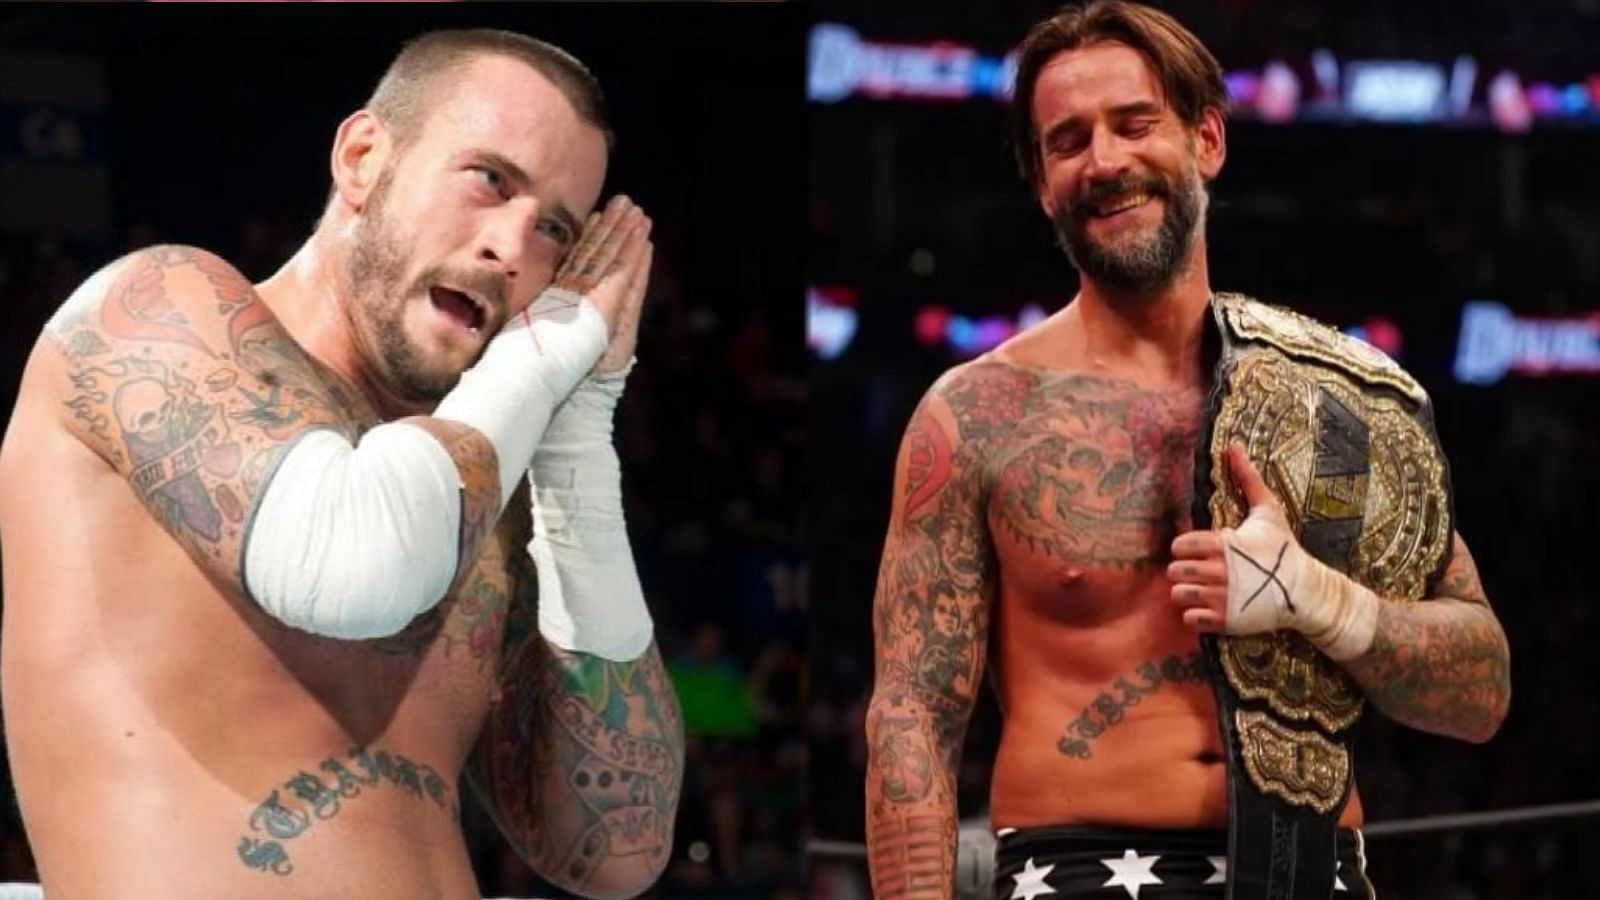 CM Punk has been a major name in both WWE and AEW.